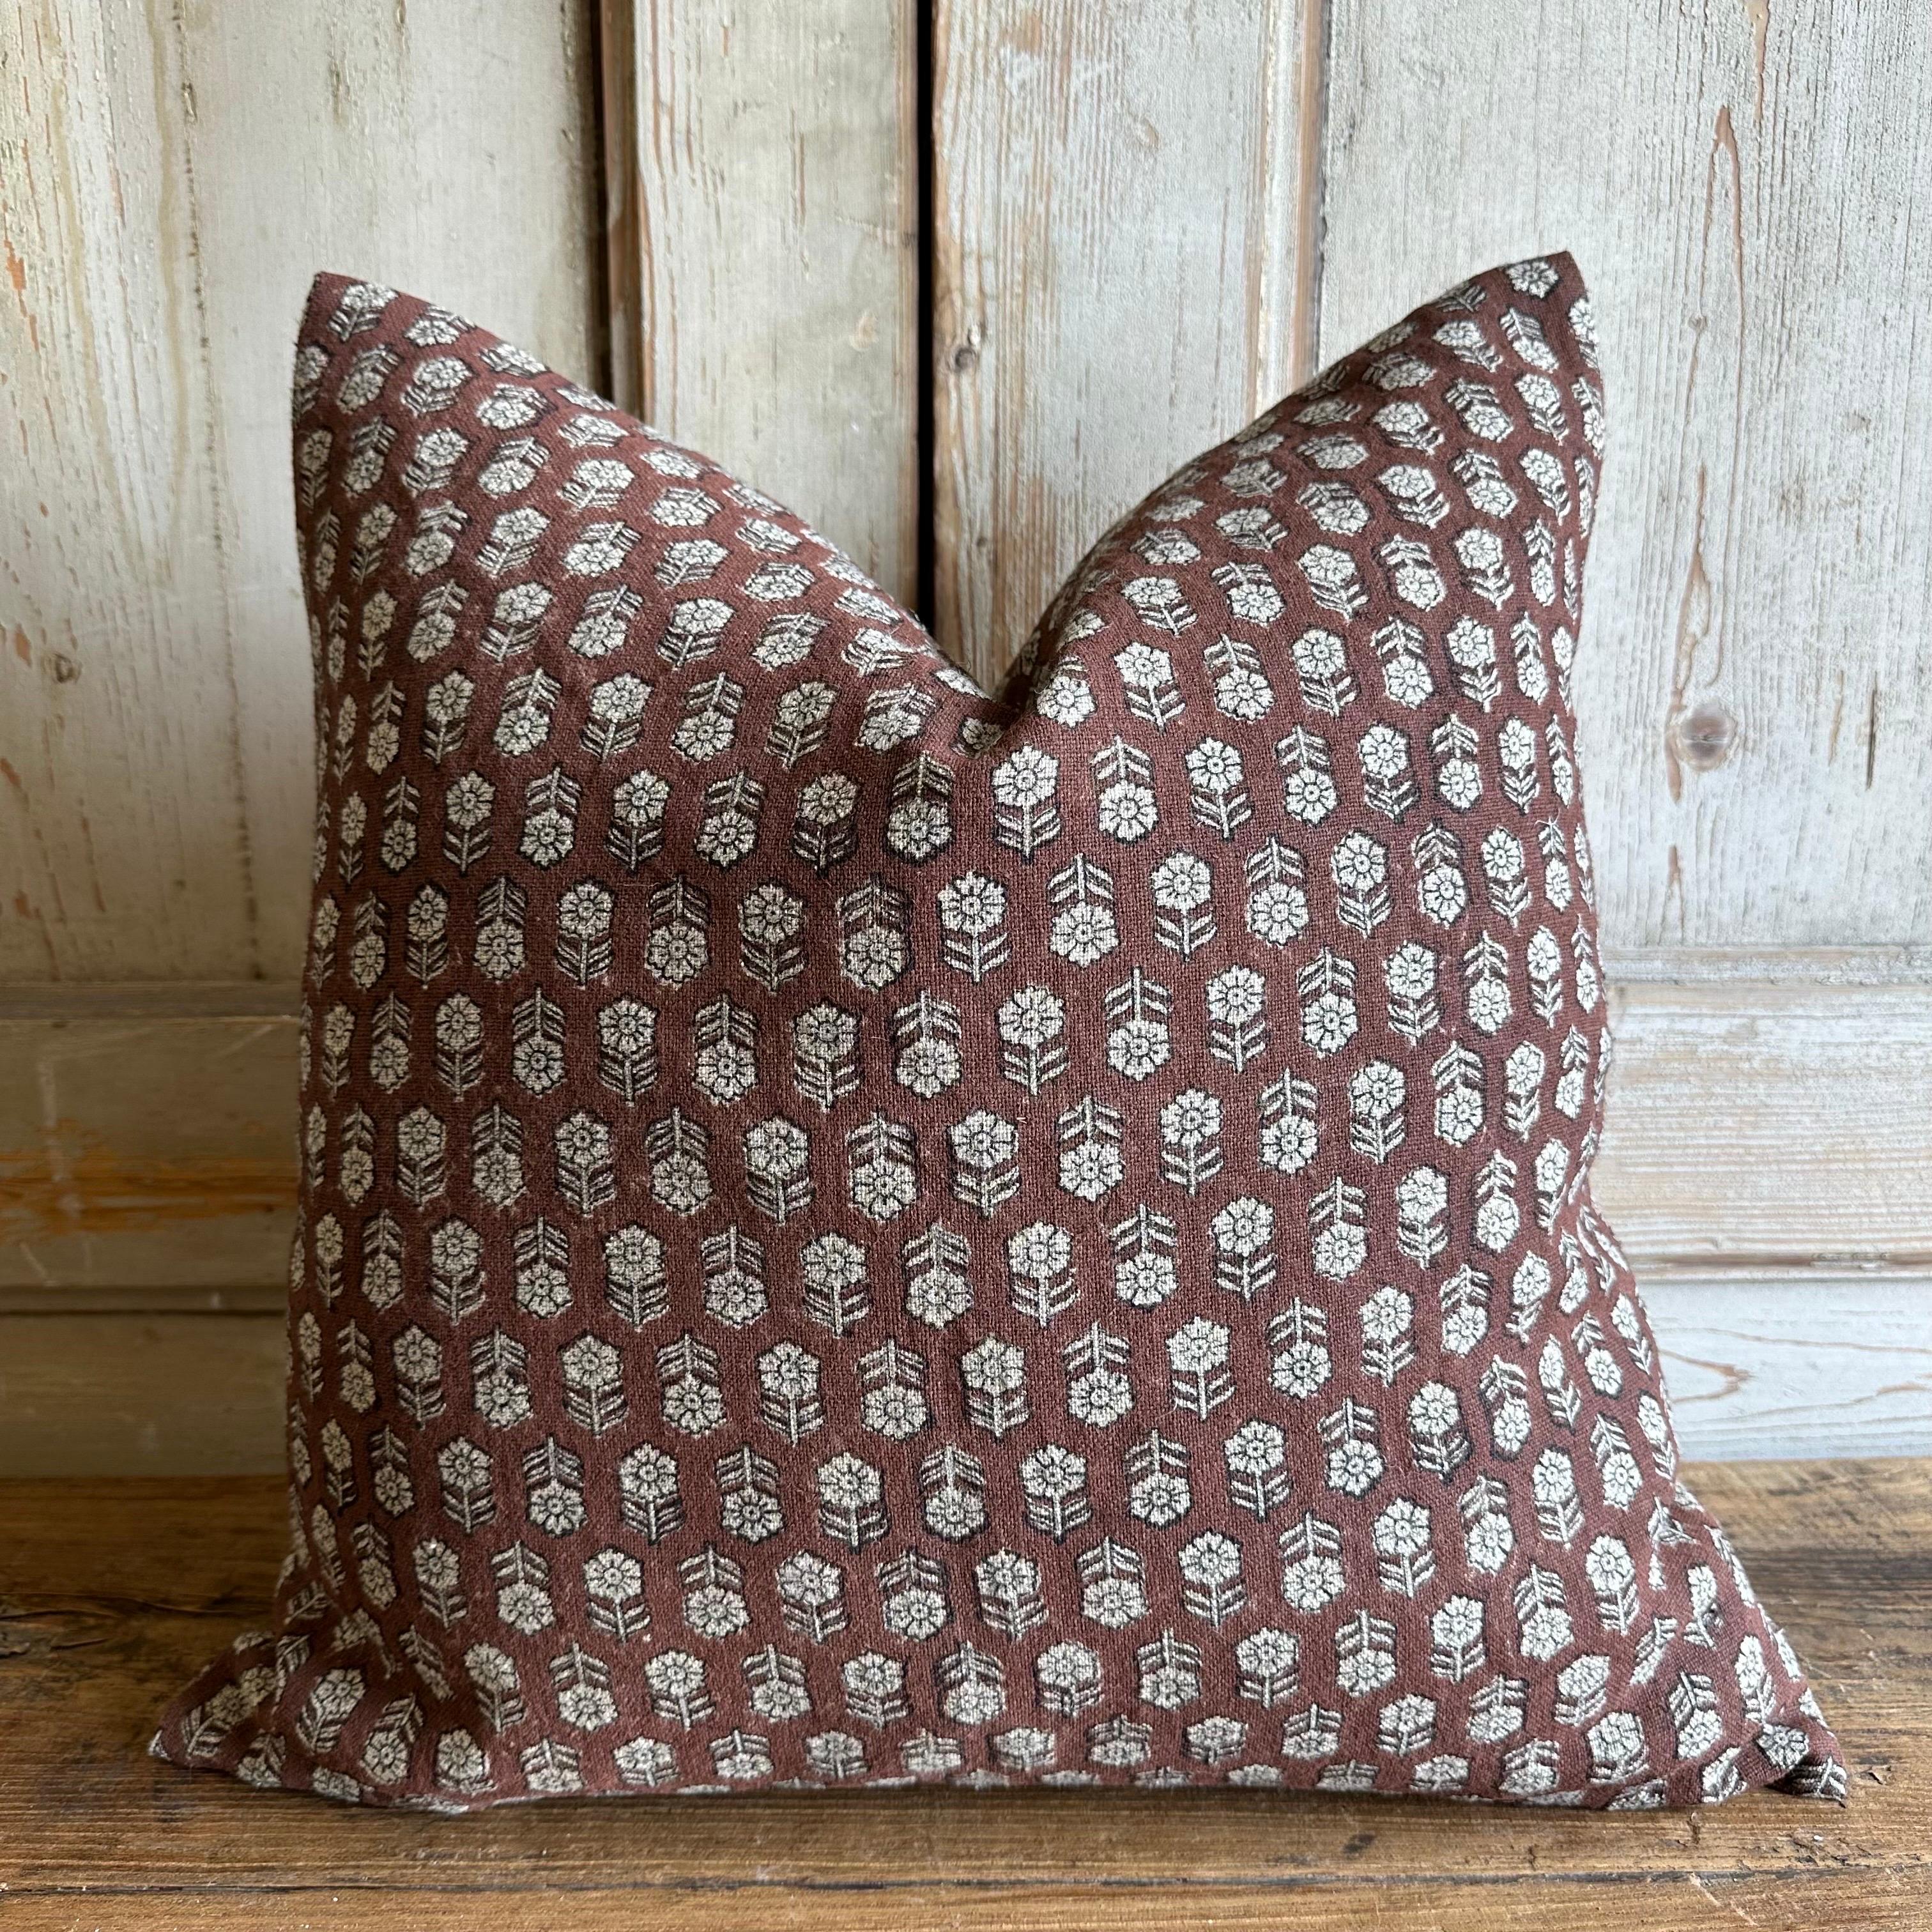 Tulsi Saffron Hand Blocked Pillow with Down Feather Insert In New Condition For Sale In Brea, CA